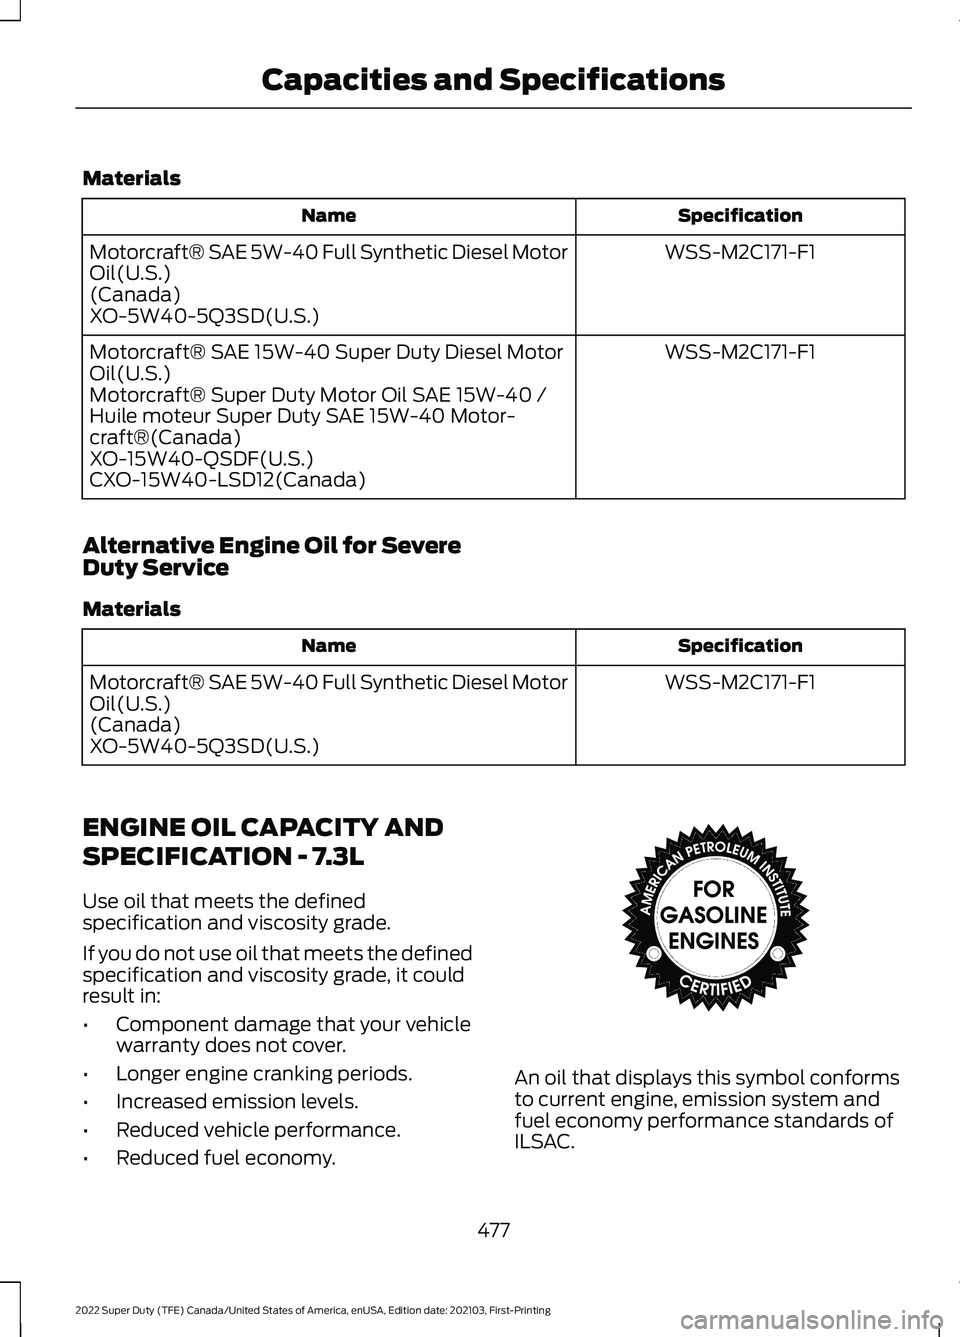 FORD F-600 2022  Owners Manual Materials
Specification
Name
WSS-M2C171-F1
Motorcraft® SAE 5W-40 Full Synthetic Diesel Motor
Oil(U.S.)
(Canada)
XO-5W40-5Q3SD(U.S.)
WSS-M2C171-F1
Motorcraft® SAE 15W-40 Super Duty Diesel Motor
Oil(U